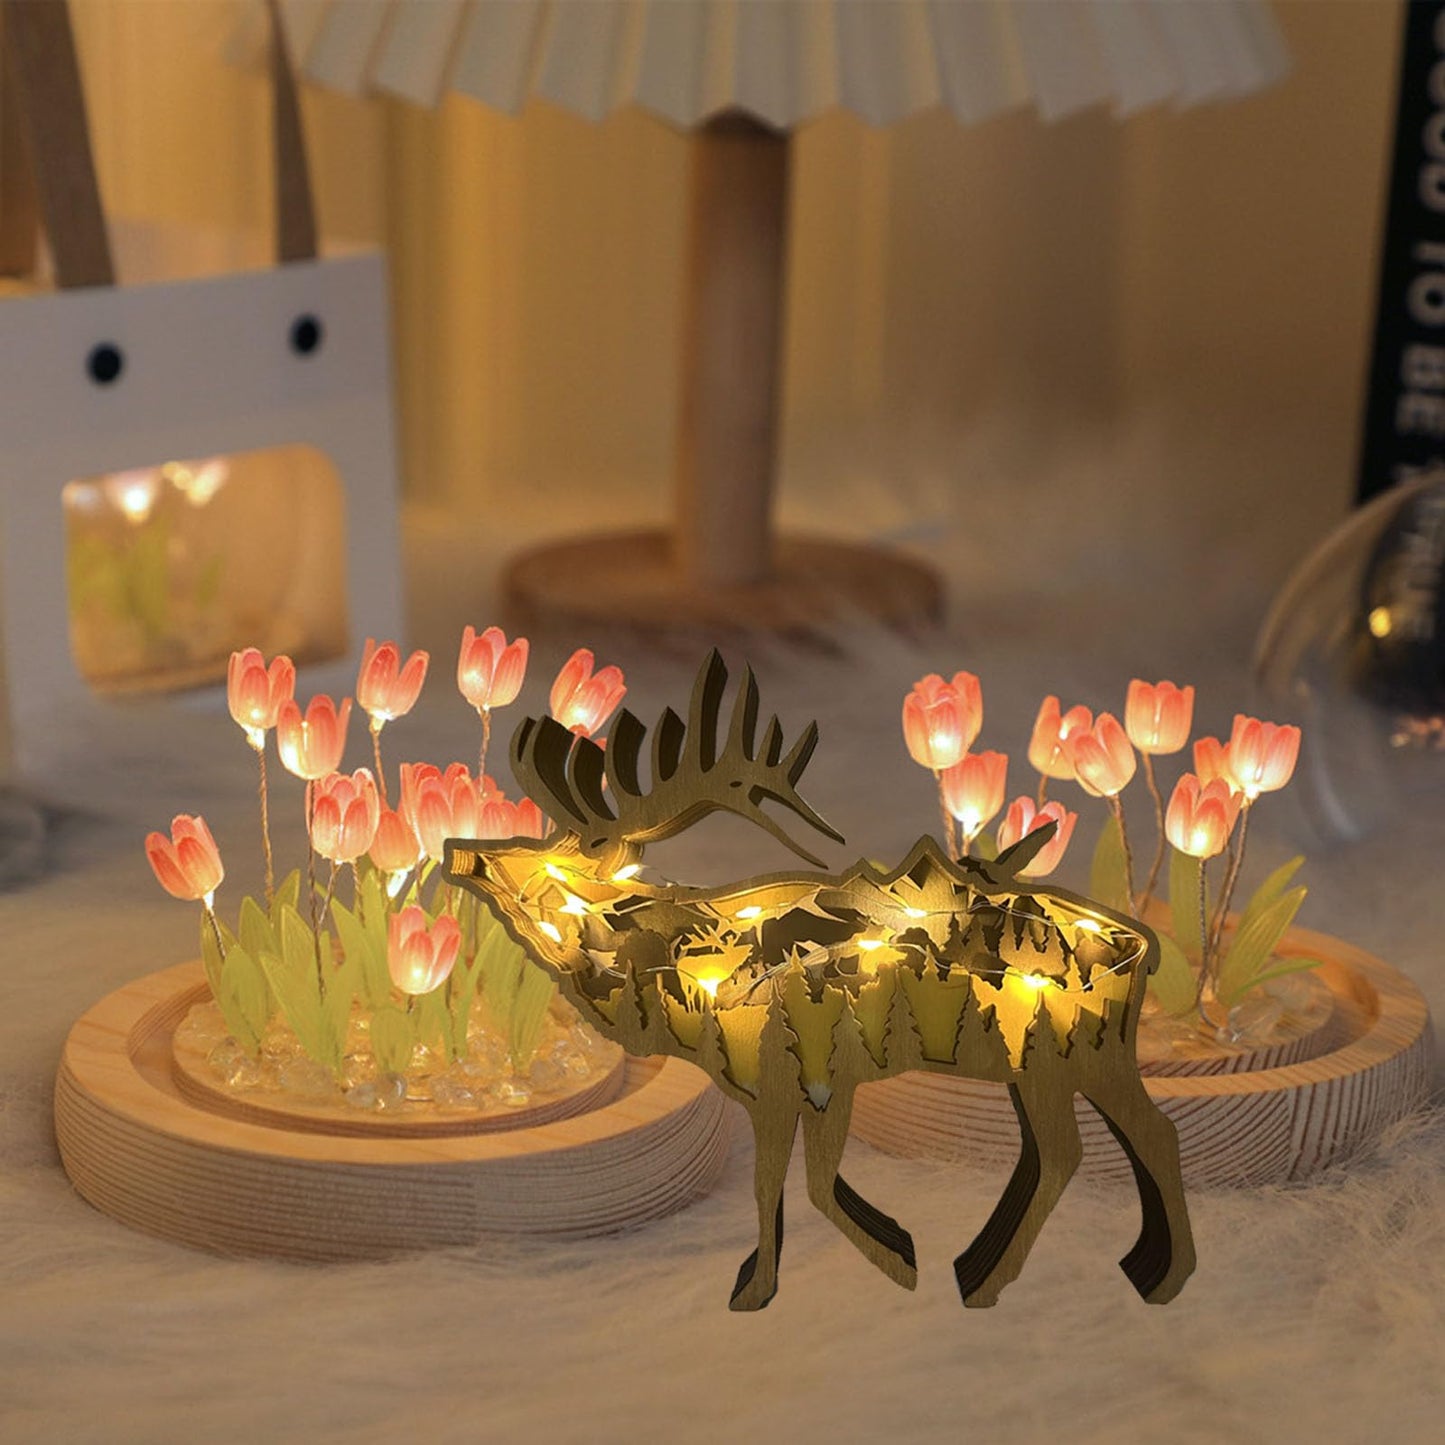 Xmas Moose Decor, Christmas Wooden Centerpiece Animal Table Decorations, 3D Multilayer Forest Wall Art Carved Moose Decor, Wooden Moose Figurine for Shelf Table Office,Glowing Moose Statue Decor (A)